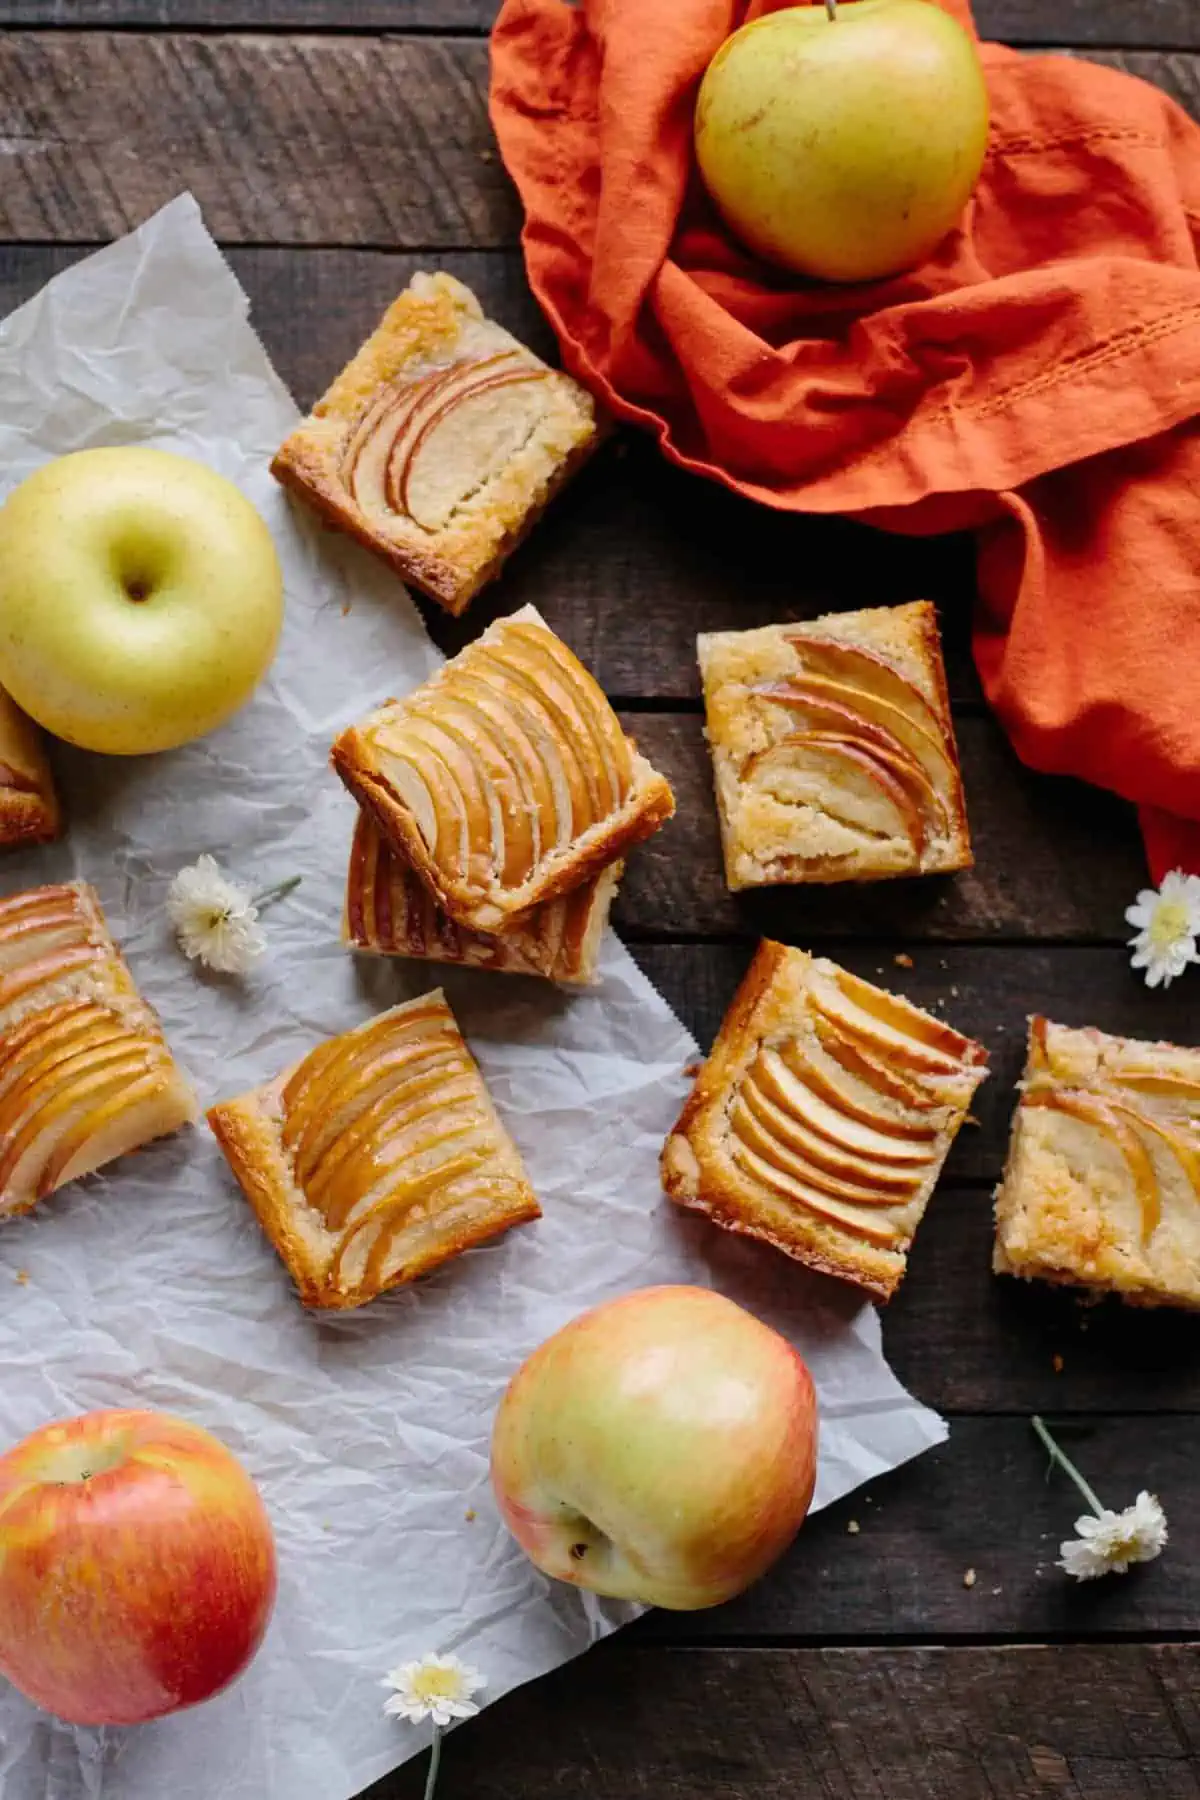 Square slices of almond apple shortbread spread on a table with whole apples mixed in.